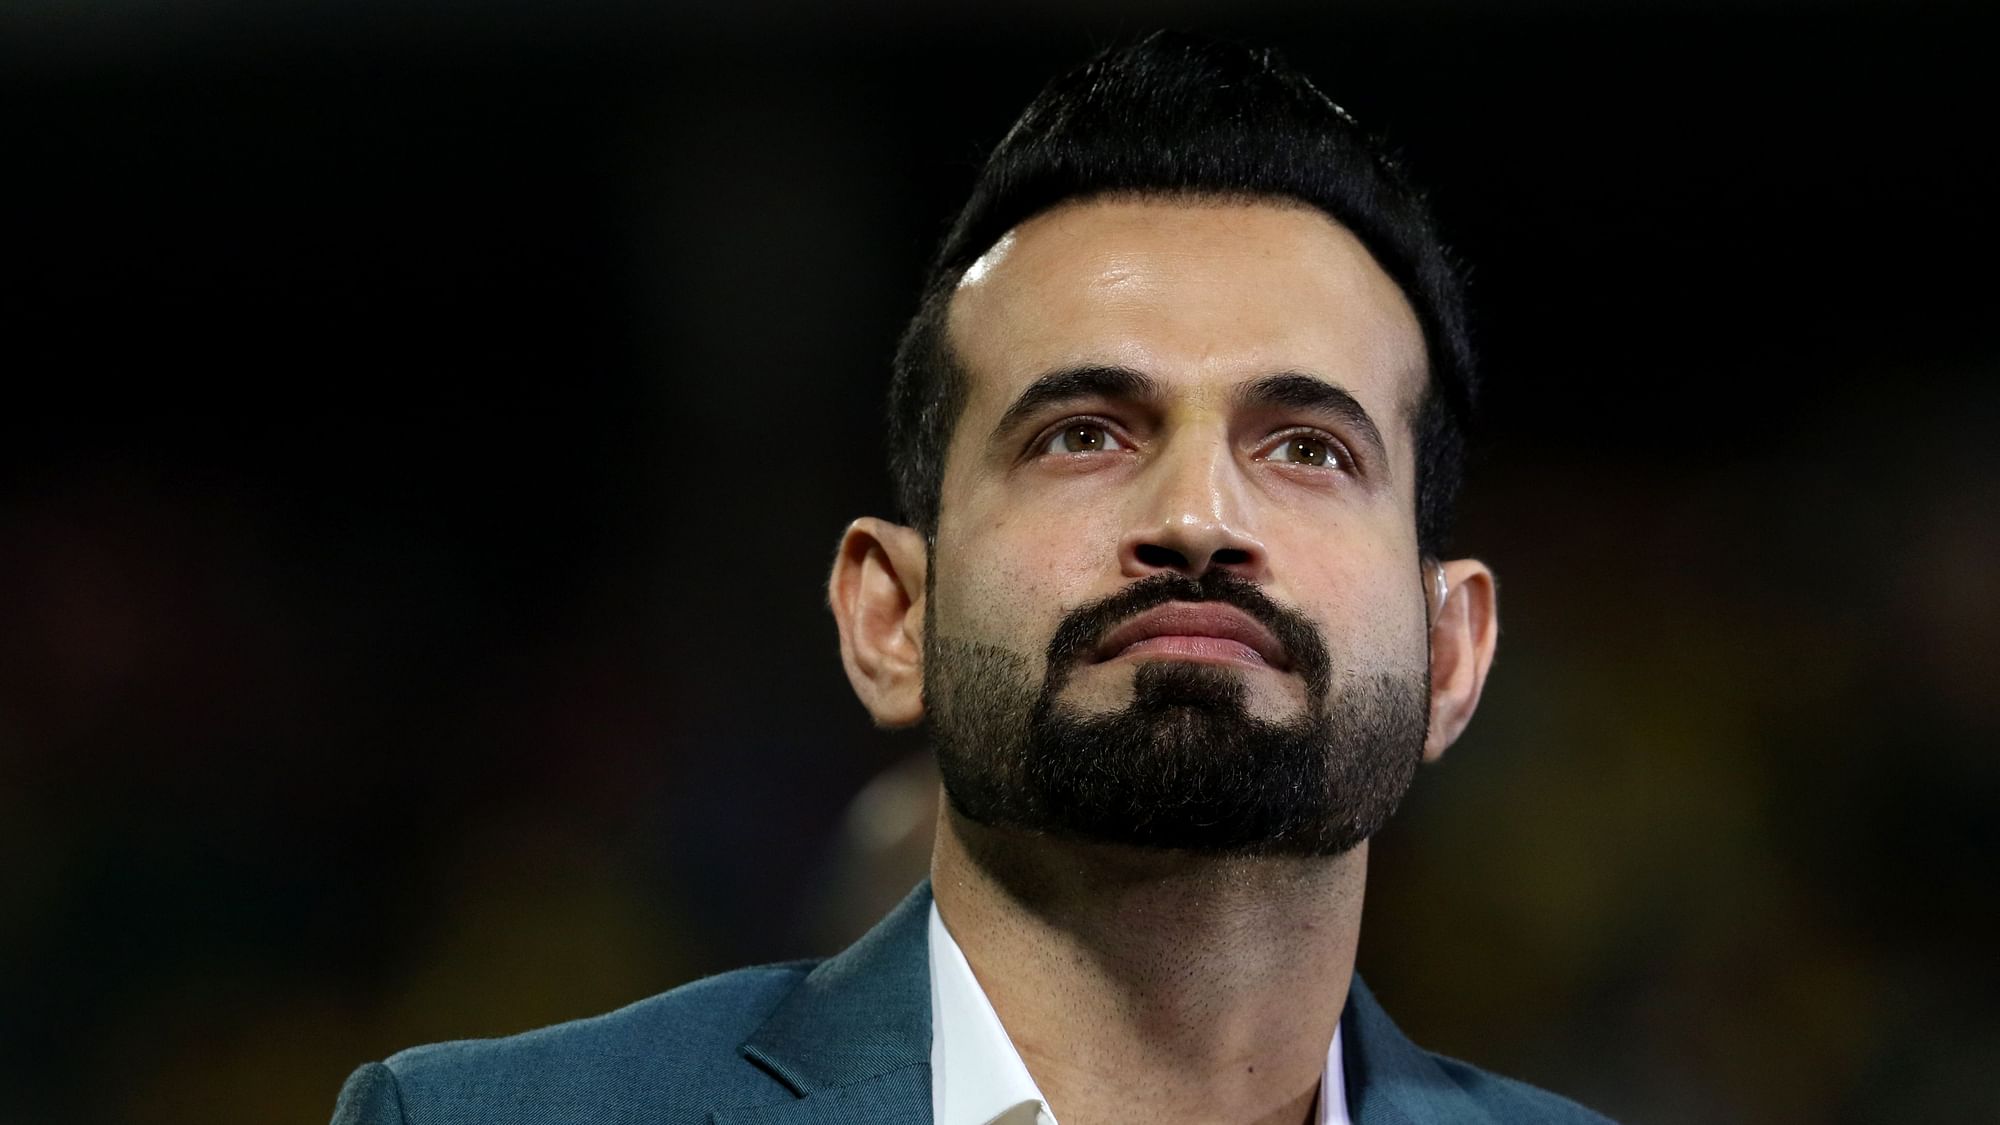 Irfan Pathan had tested positive for COVID-19